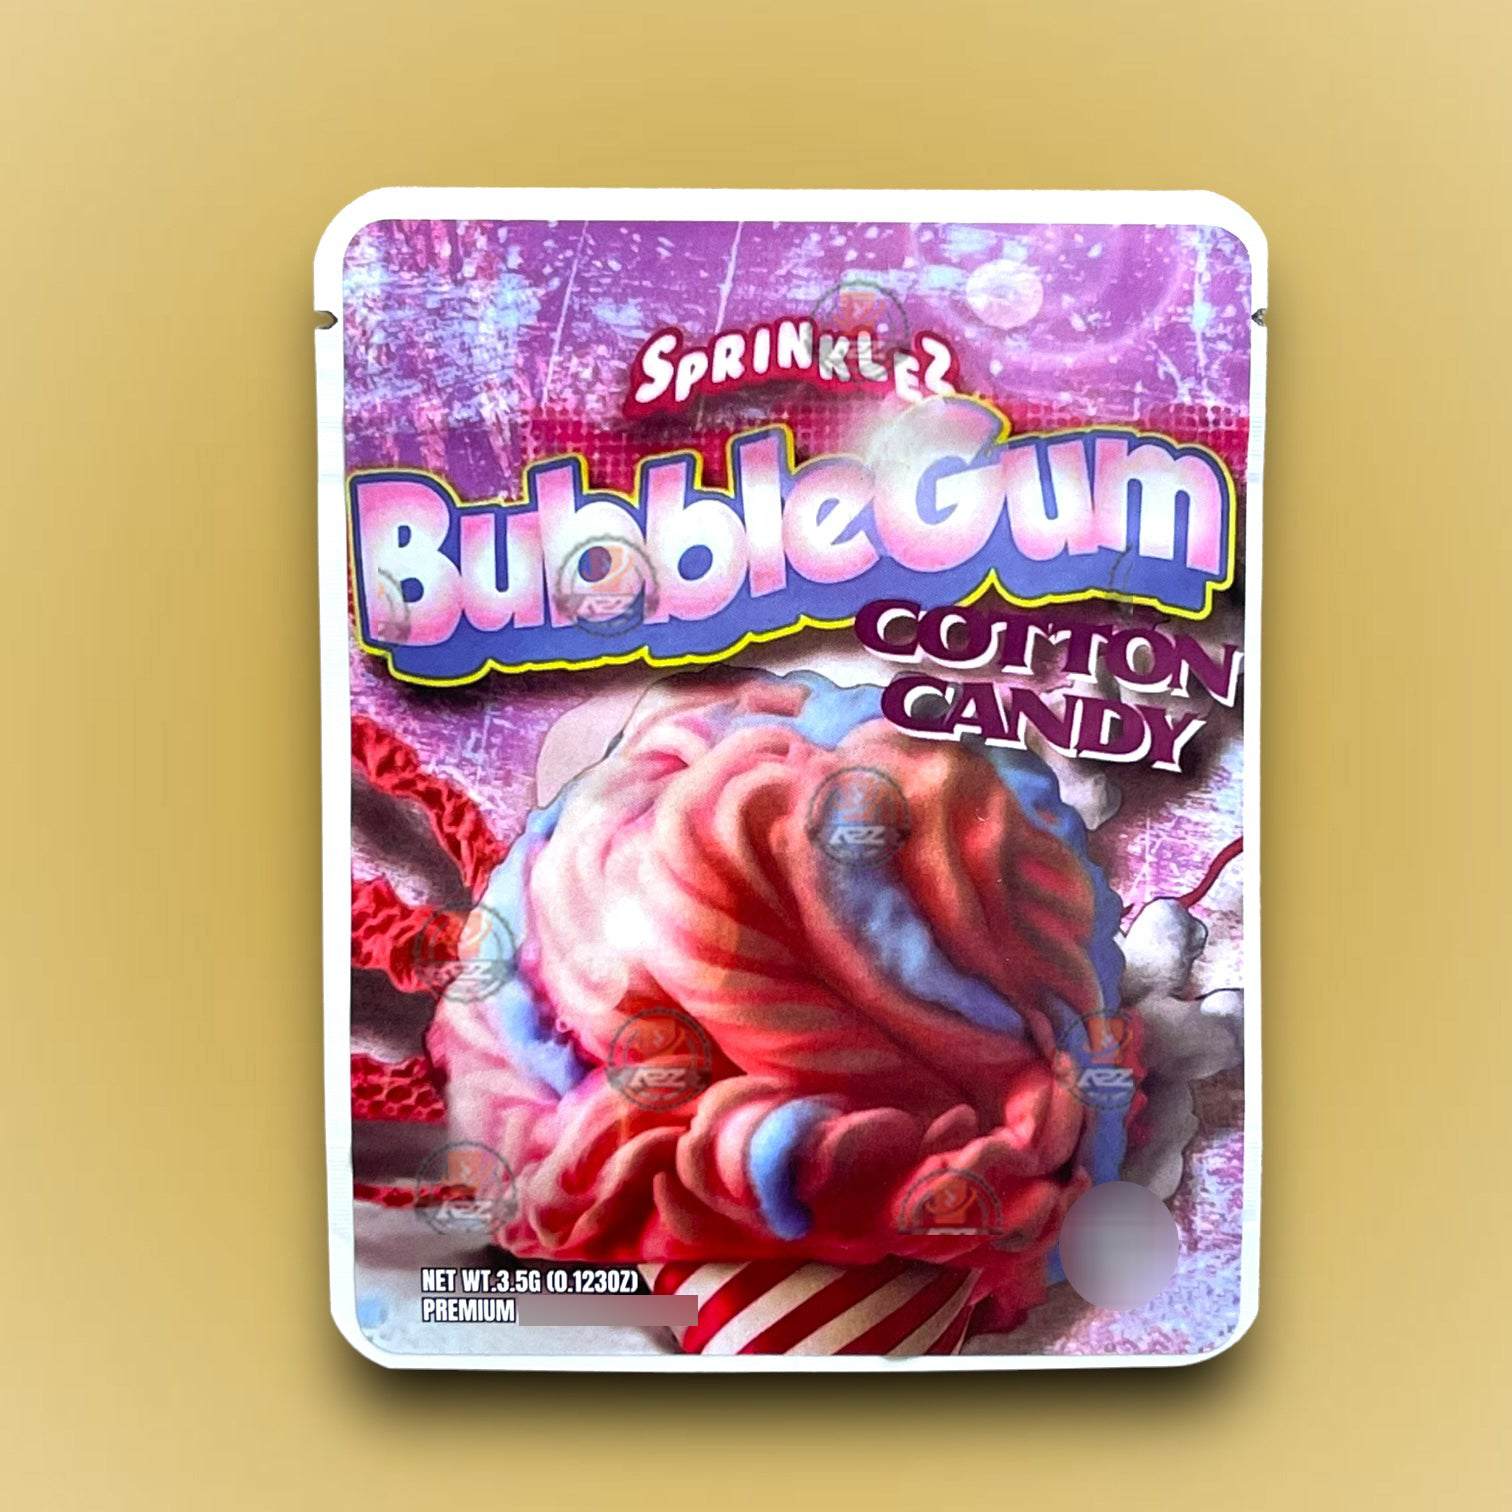 Sprinklez Bubblegum Cotton Candy 3.5G Mylar Bags -With stickers and label